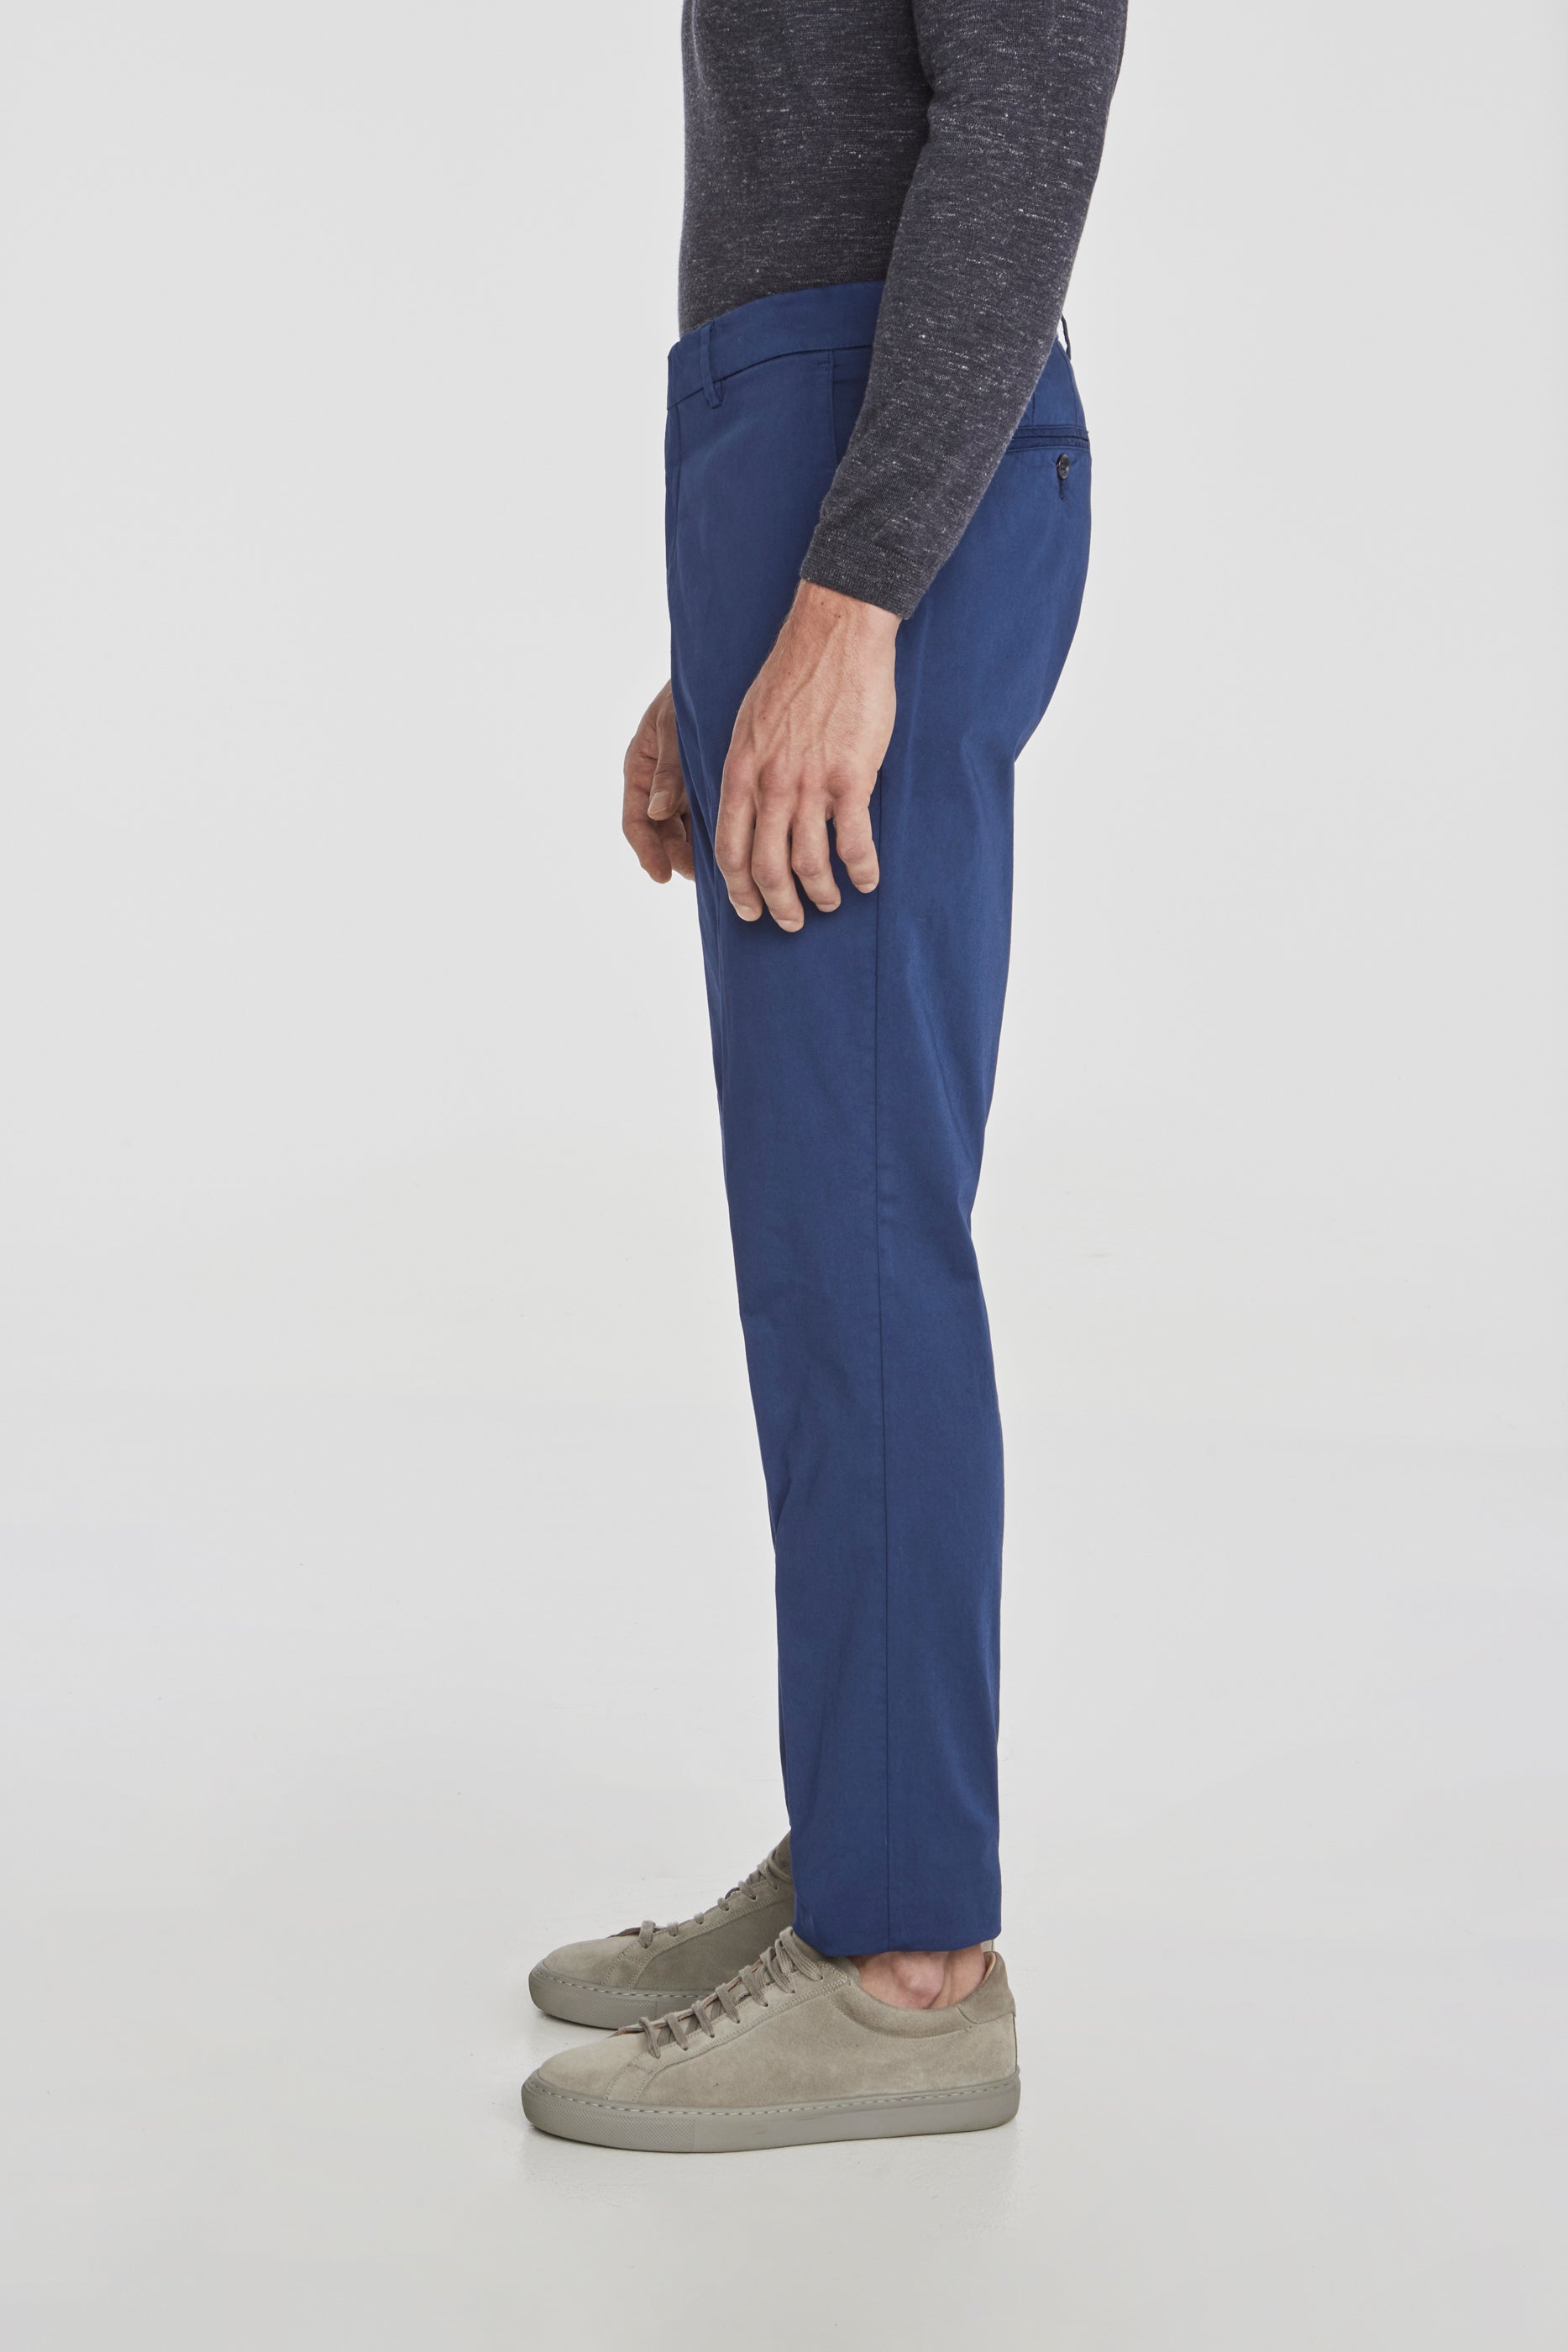 Alt view 2 Jace Cotton Stretch Chino in Royal Blue